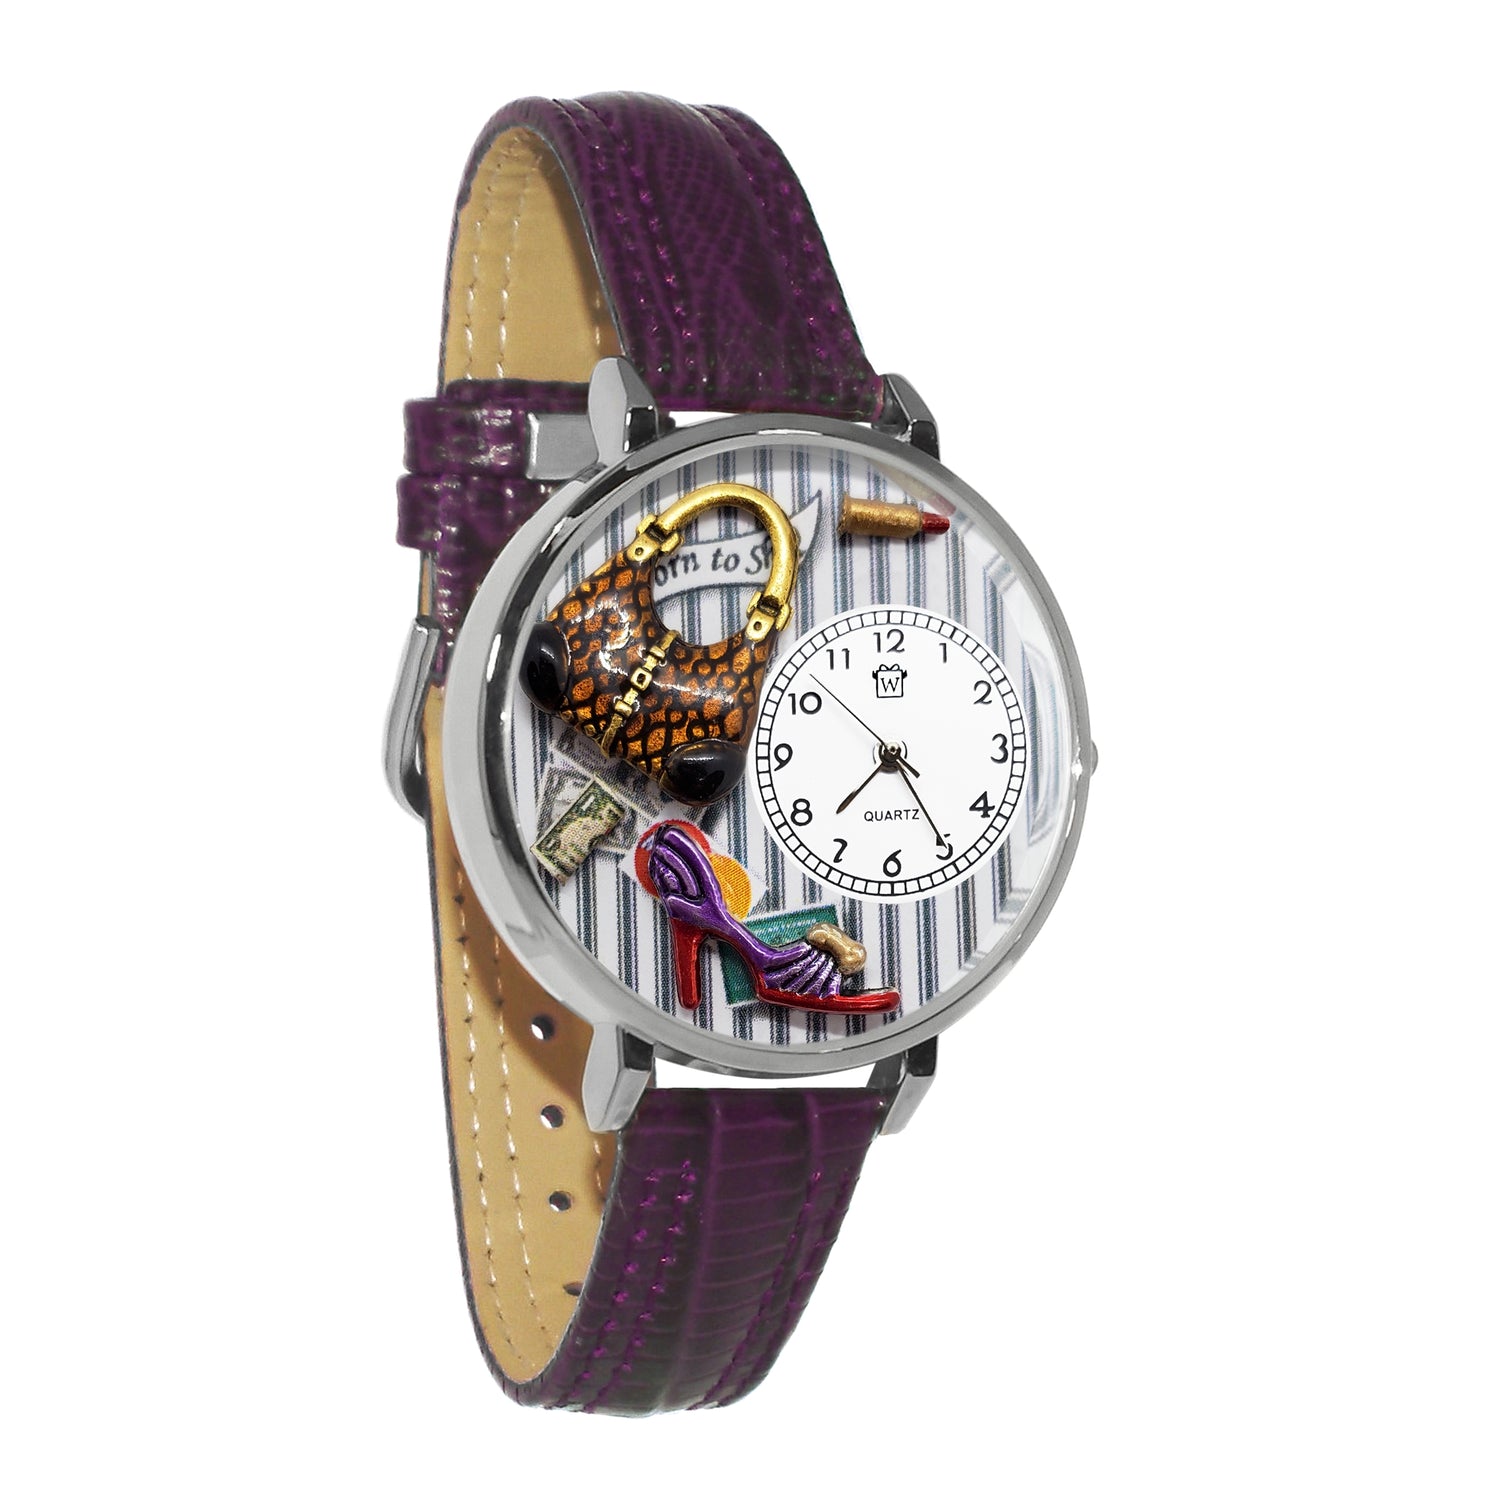 Whimsical Gifts | Fashionista New 3D Watch Large Style | Handmade in USA | Hobbies & Special Interests | Fashionista | Novelty Unique Fun Miniatures Gift | Silver Finish Purple Leather Watch Band